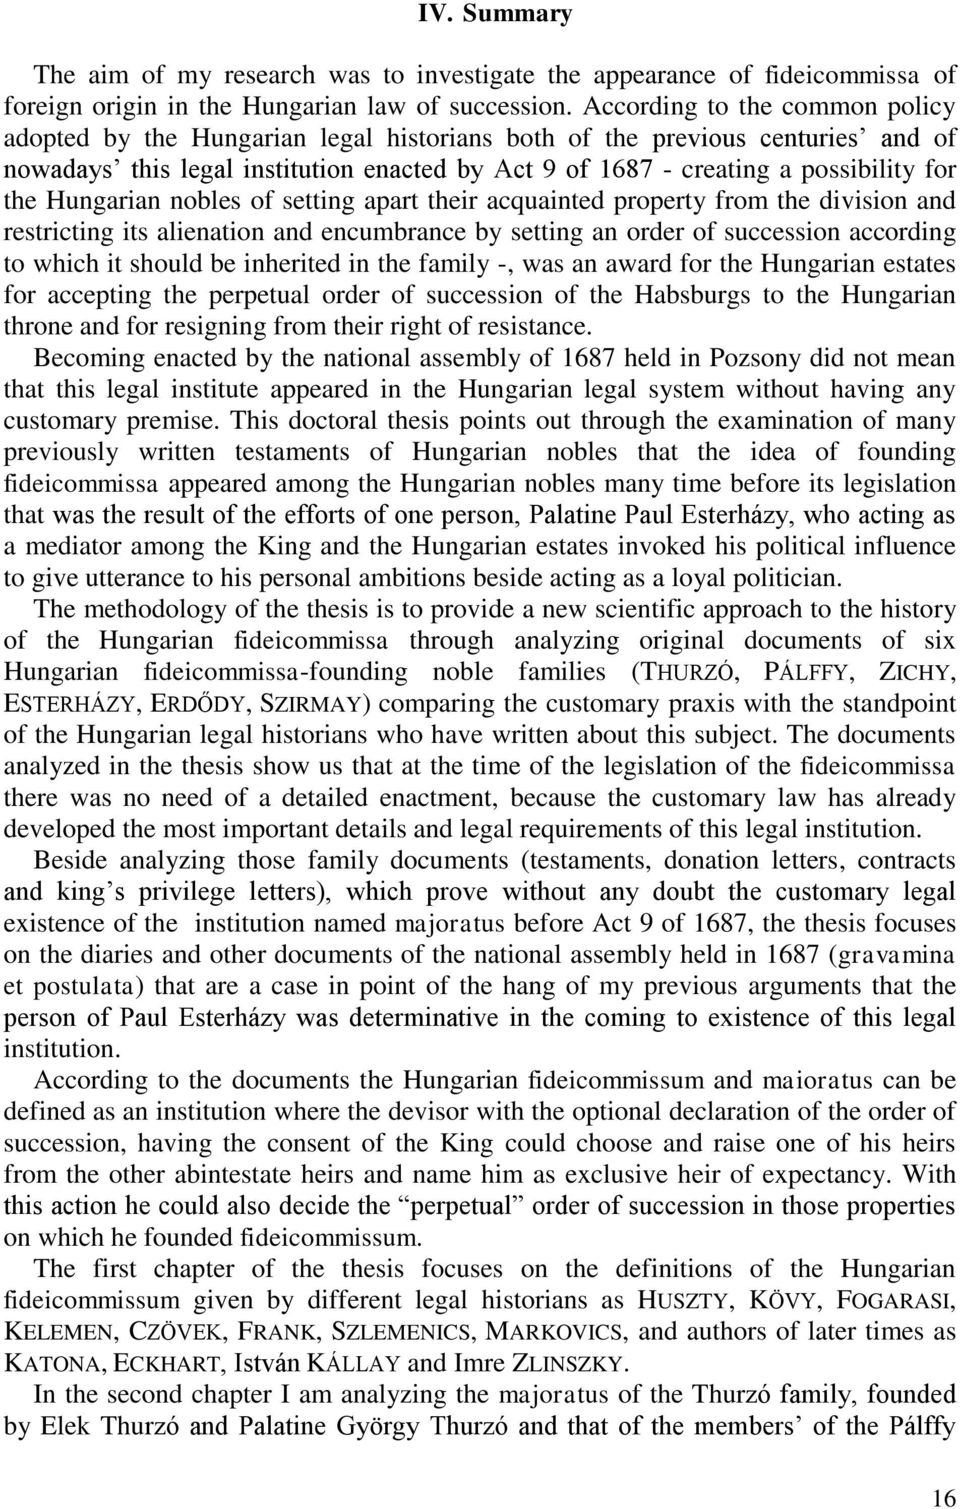 the Hungarian nobles of setting apart their acquainted property from the division and restricting its alienation and encumbrance by setting an order of succession according to which it should be